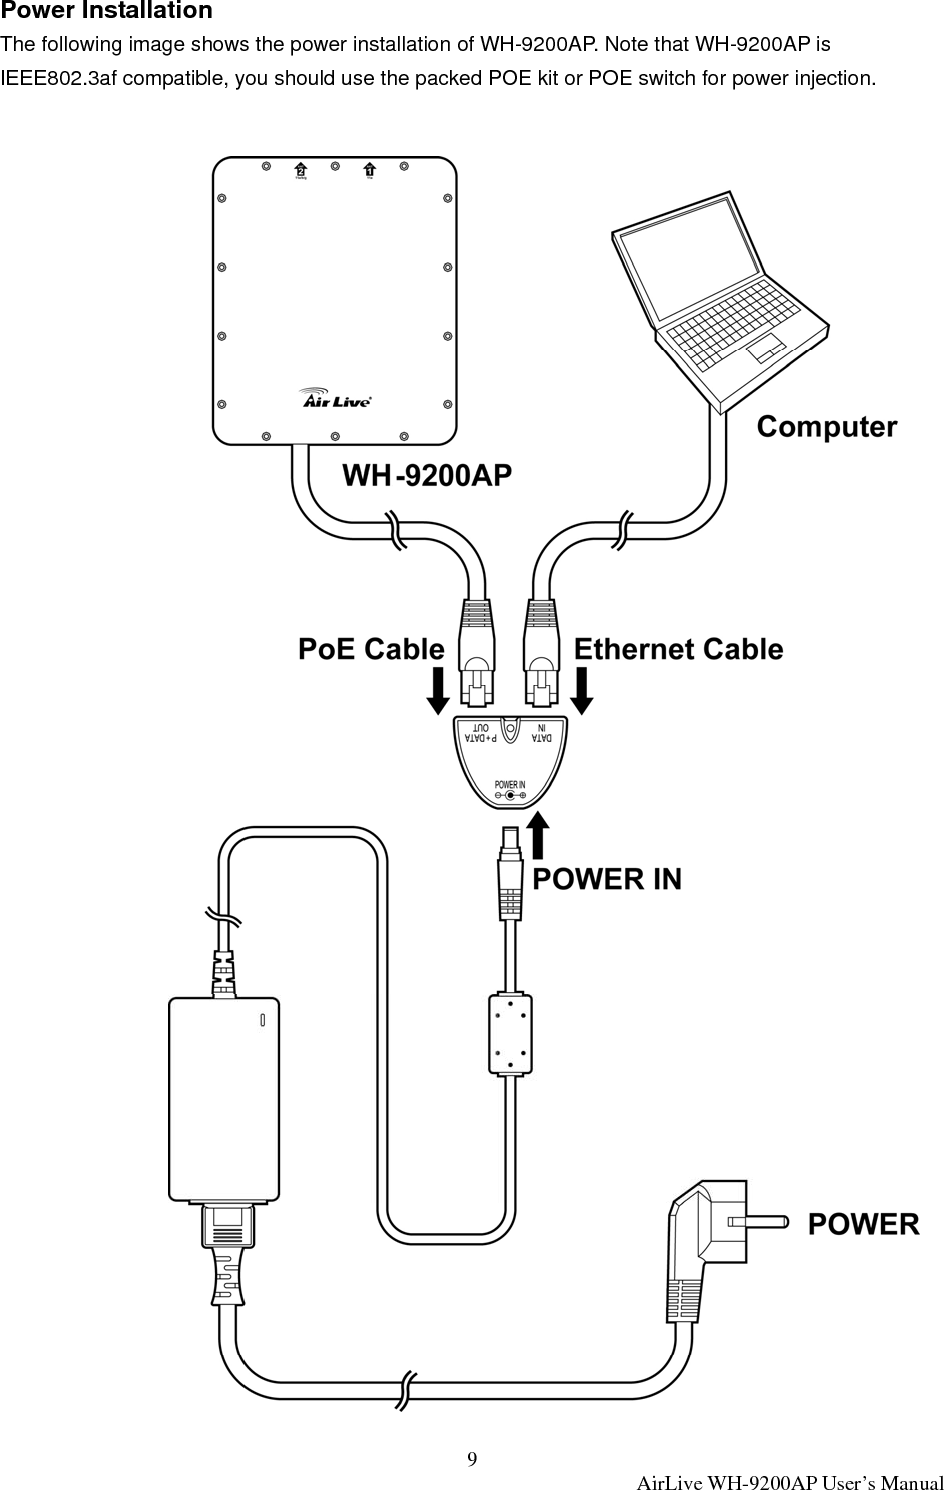 9  AirLive WH-9200AP User’s Manual Power Installation The following image shows the power installation of WH-9200AP. Note that WH-9200AP is IEEE802.3af compatible, you should use the packed POE kit or POE switch for power injection. 